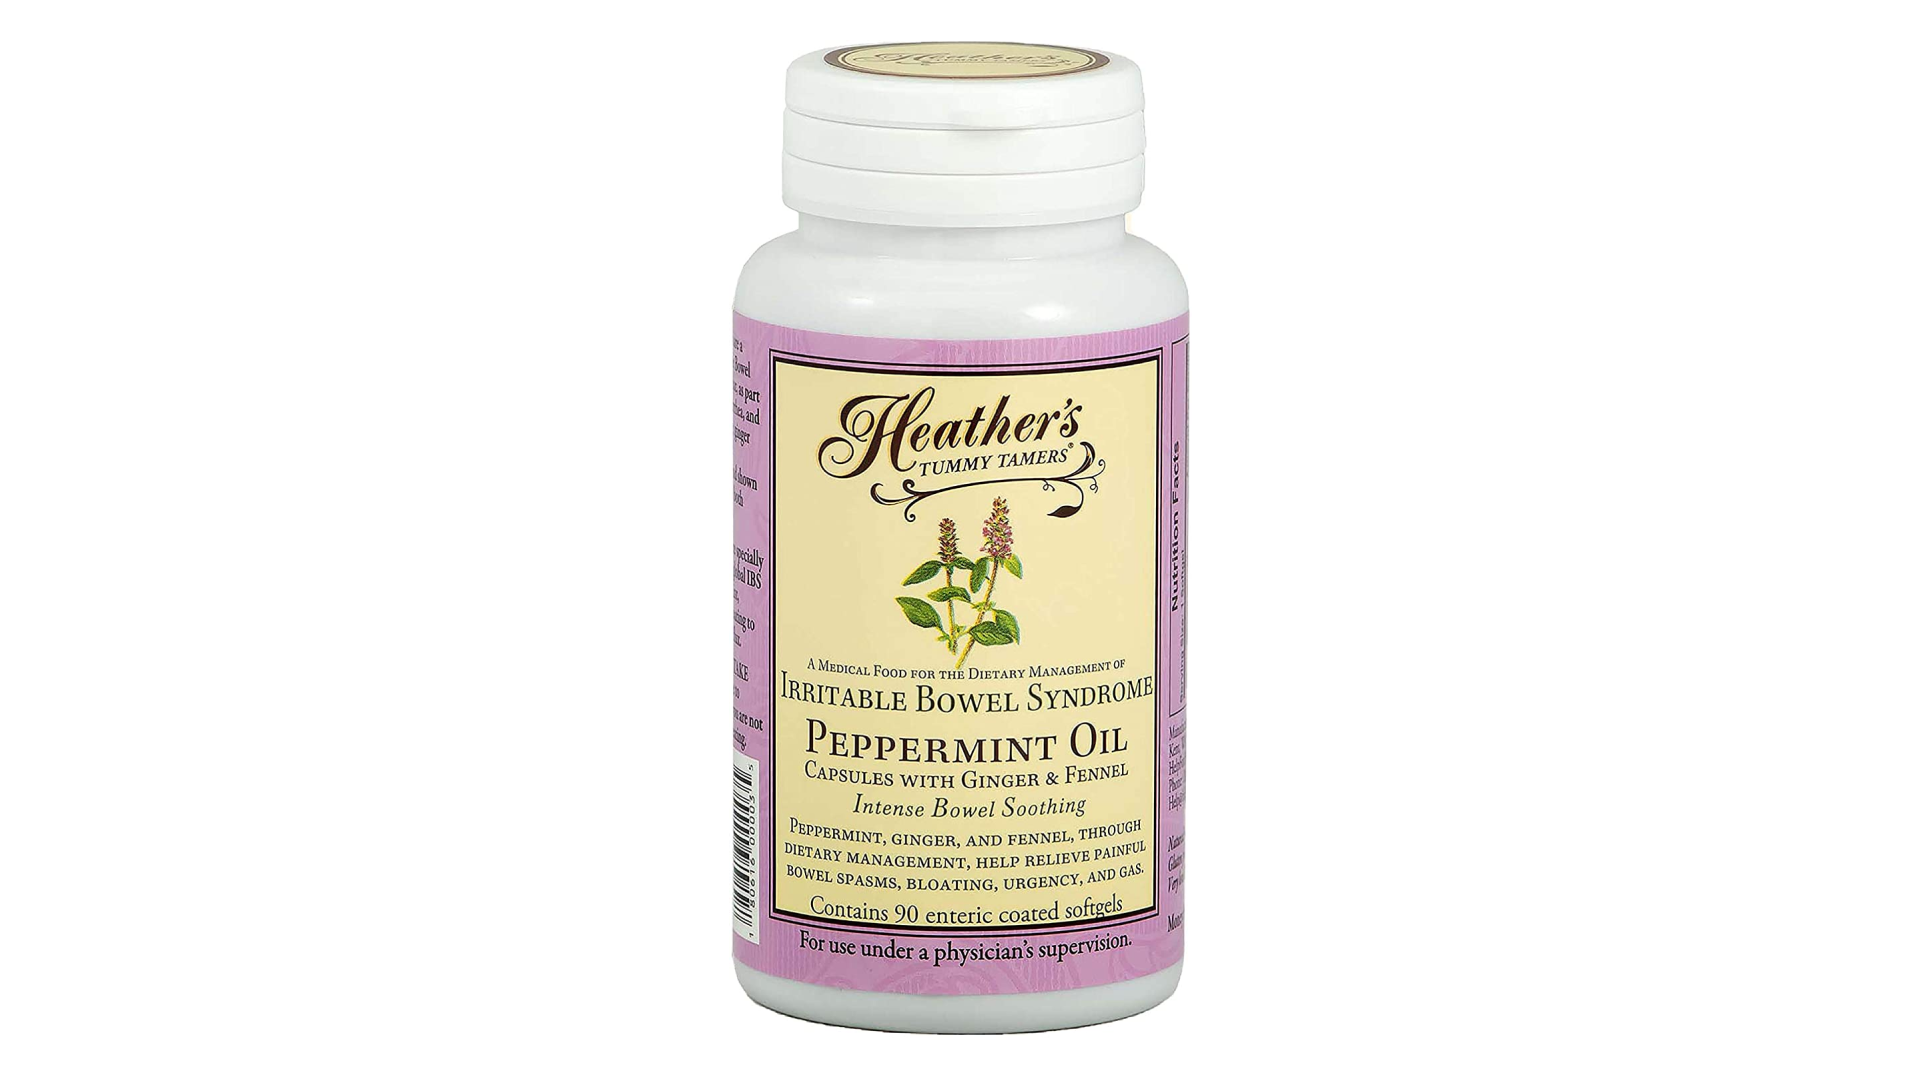 heather's tummy tamers peppermint oil capsules